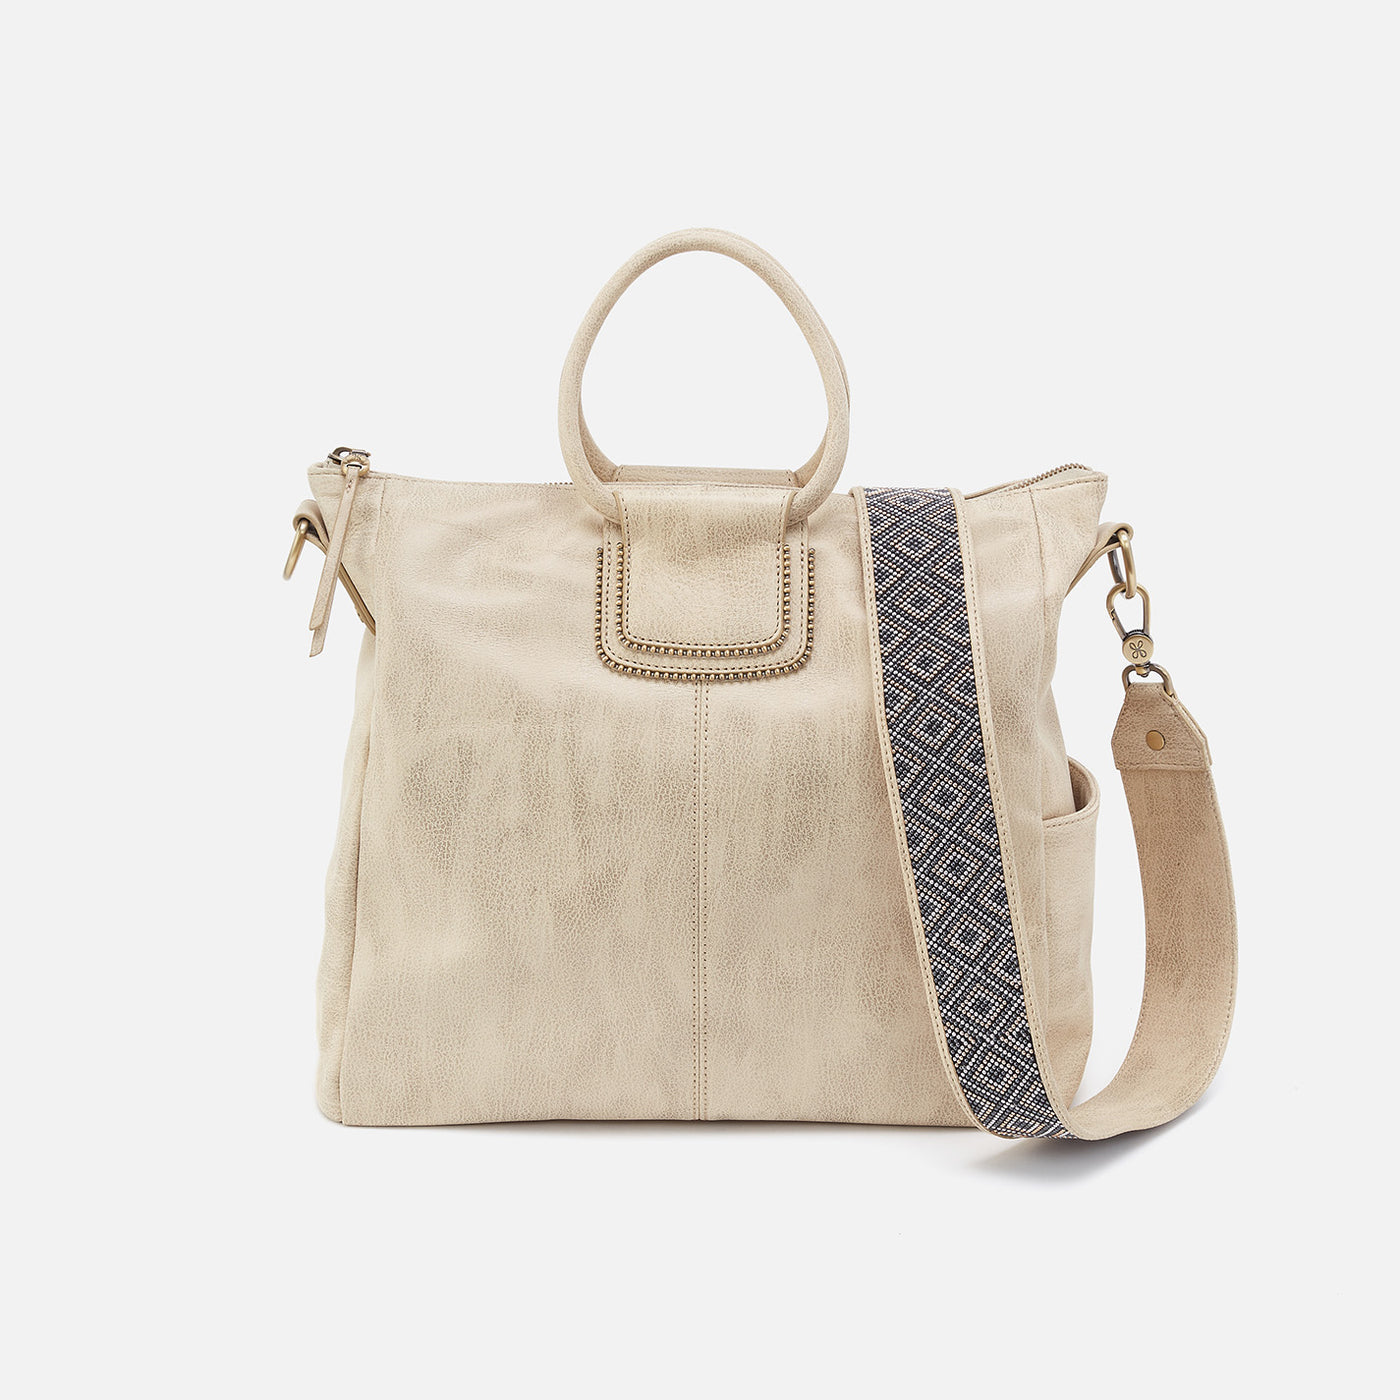 Sheila Large Satchel in Metallic Leather - Gold